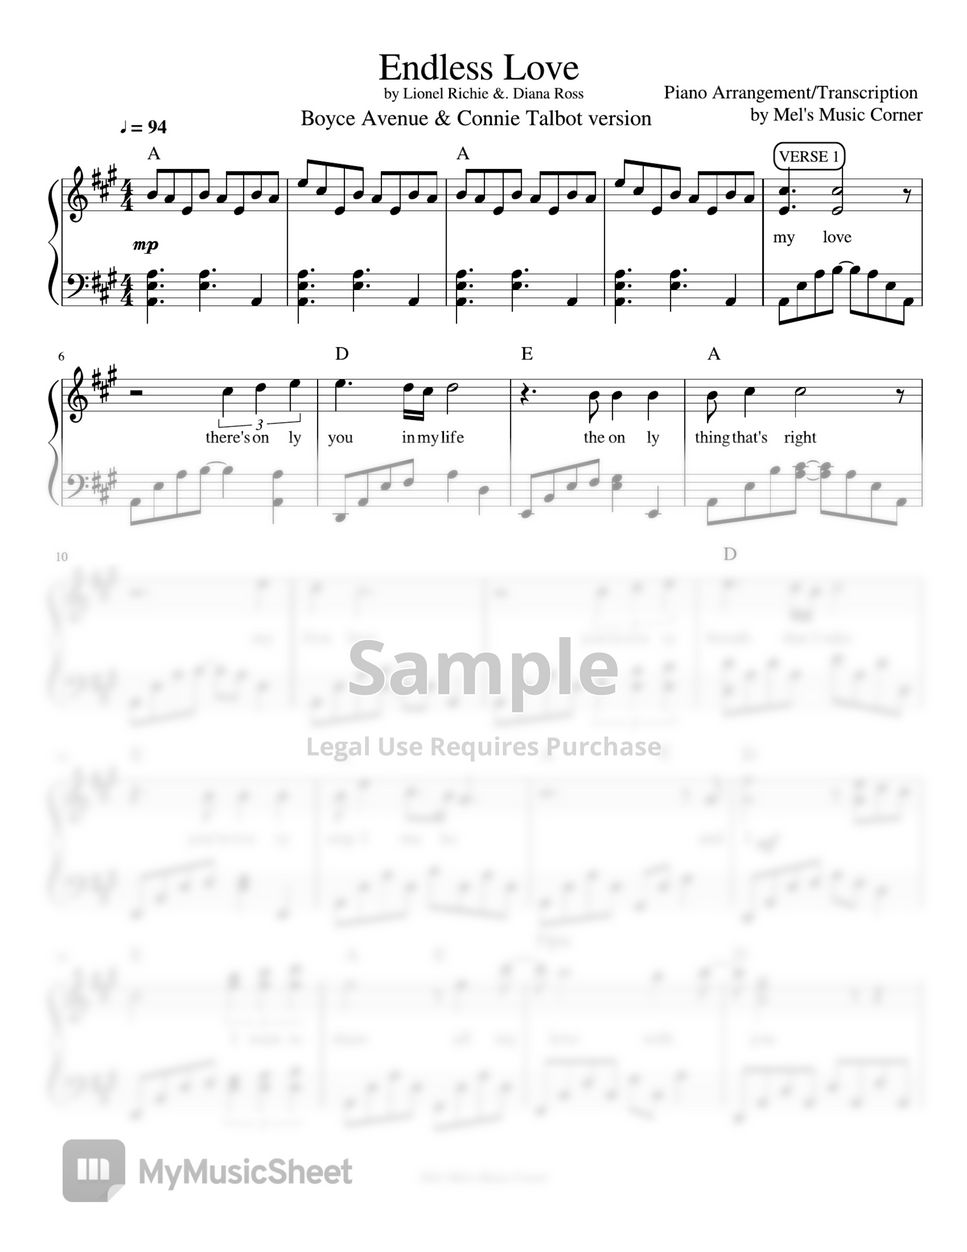 Lionel Richie & Diana Ross - Endless Love (piano sheet music) by Mel's Music Conrner